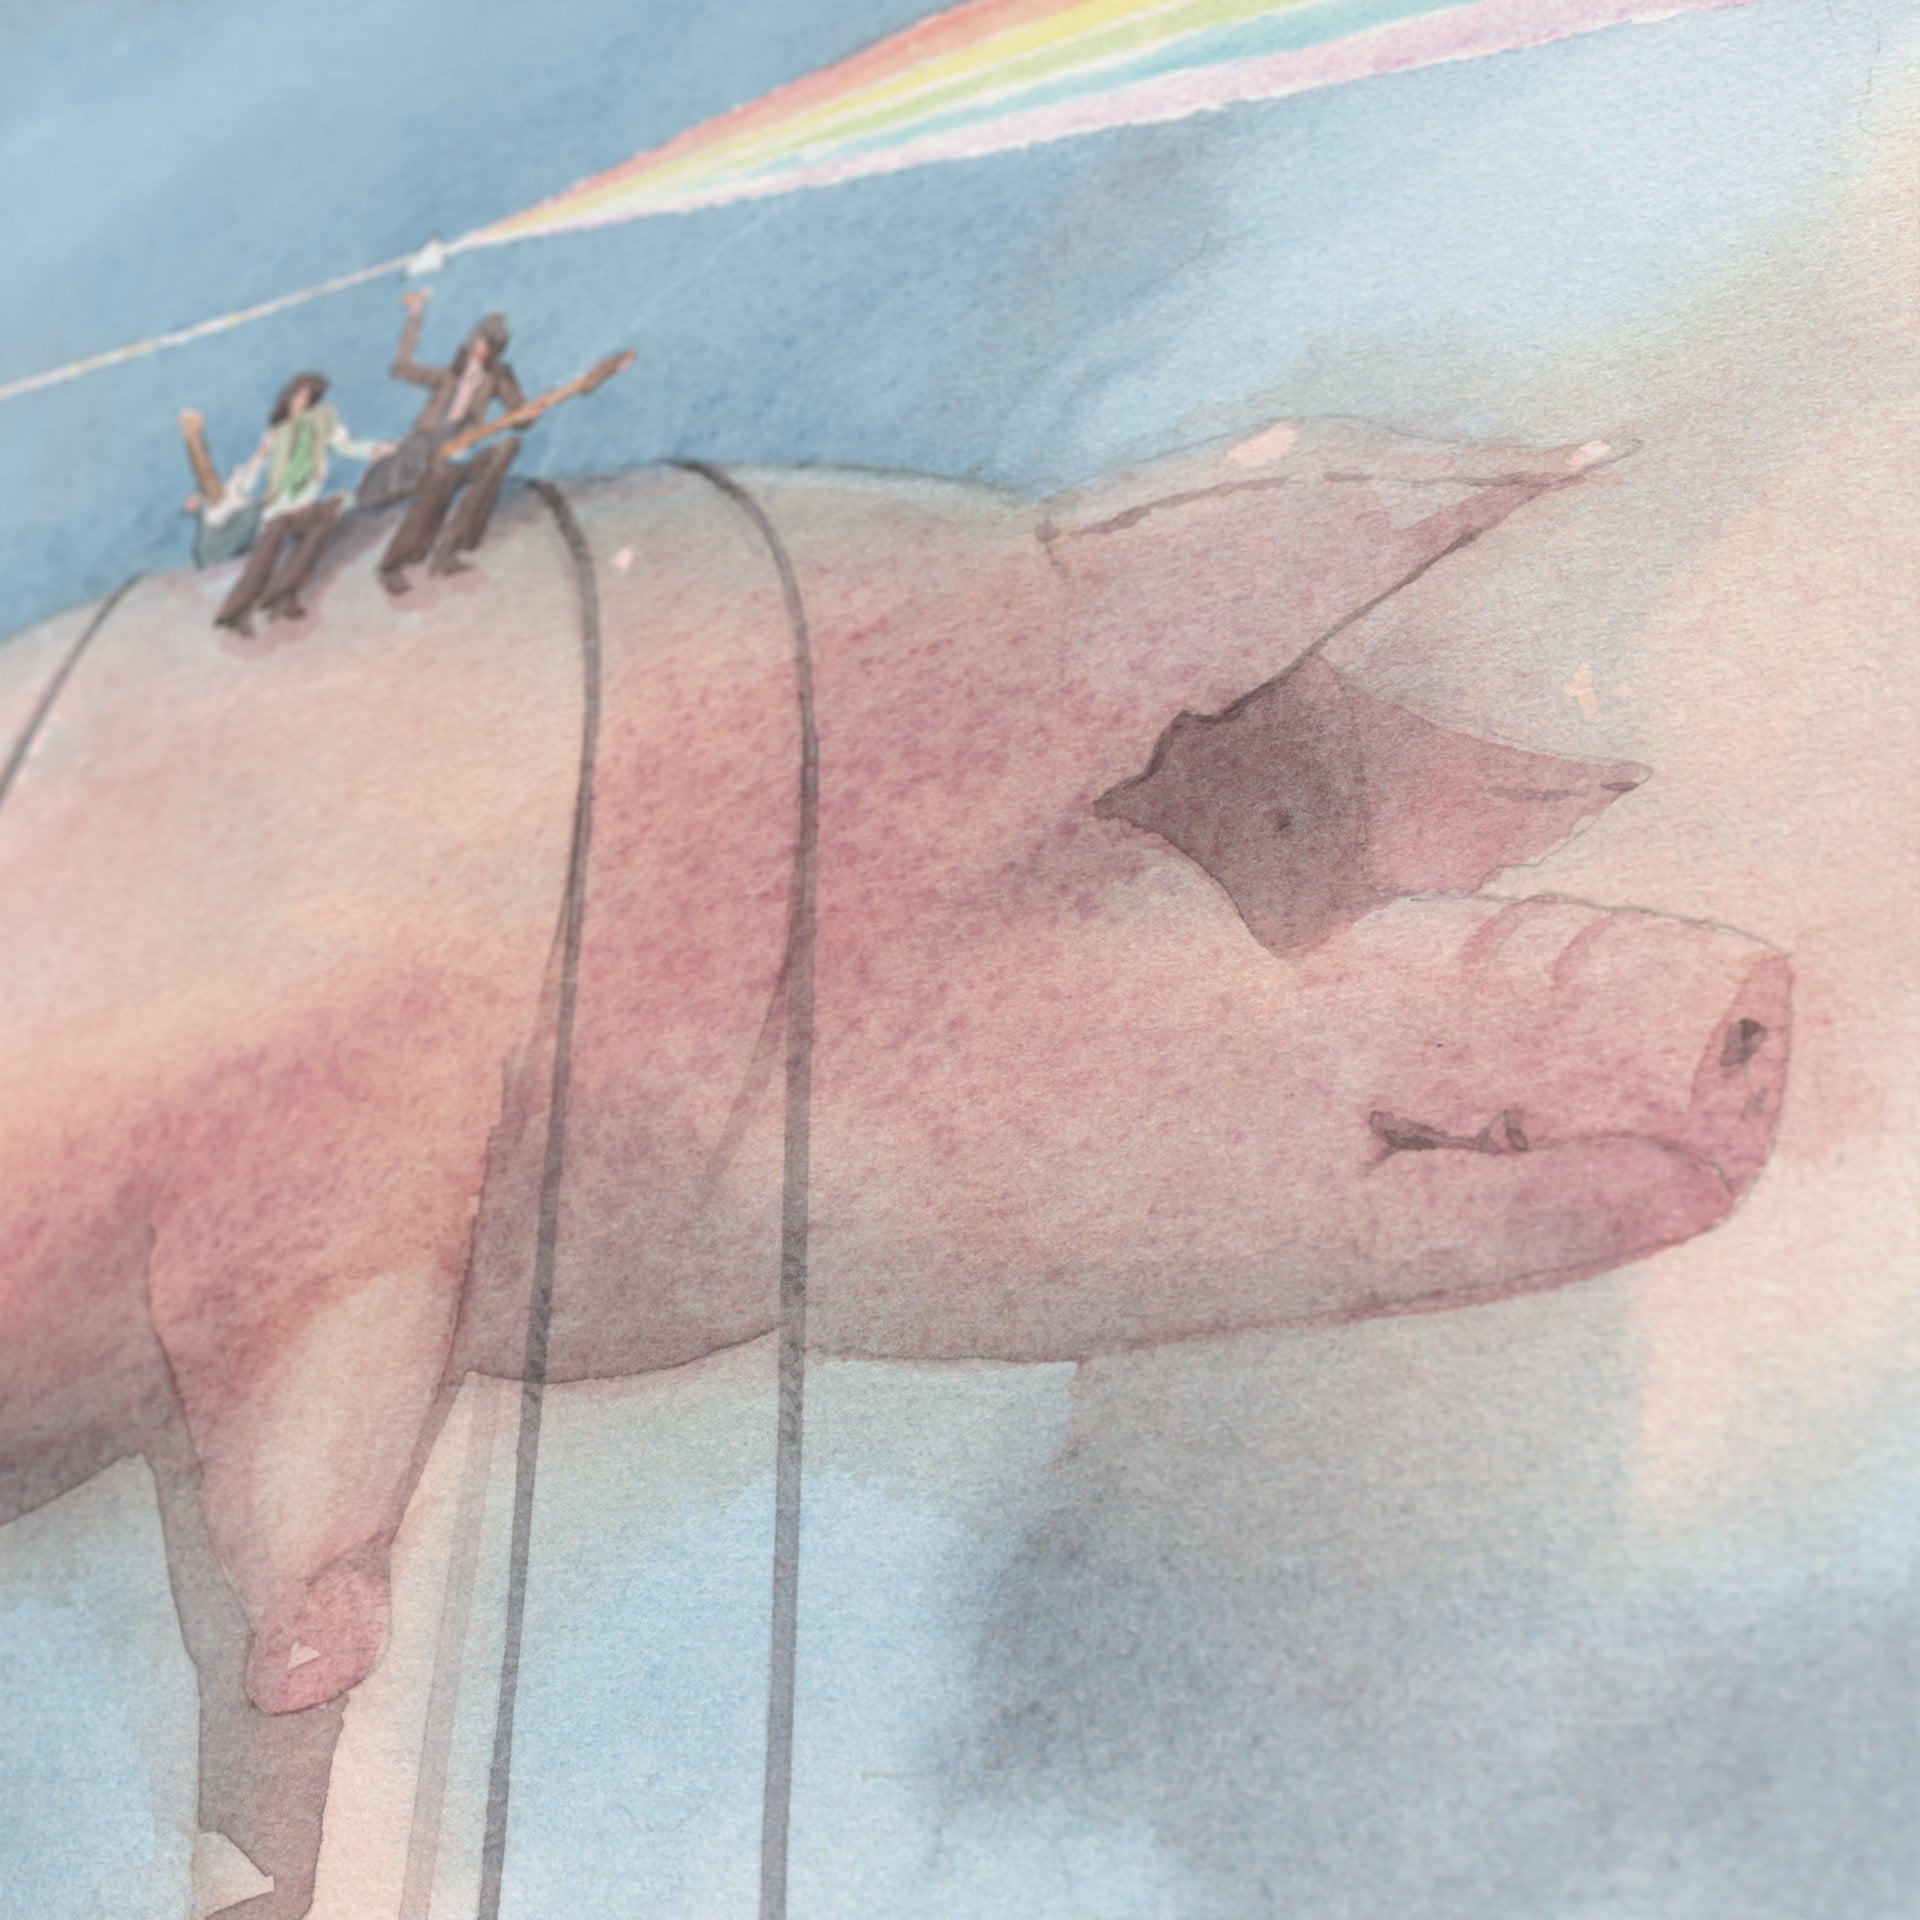 The Flying Pig Pub in Cambridge - limited edition print Syd Barret and David Gilmour